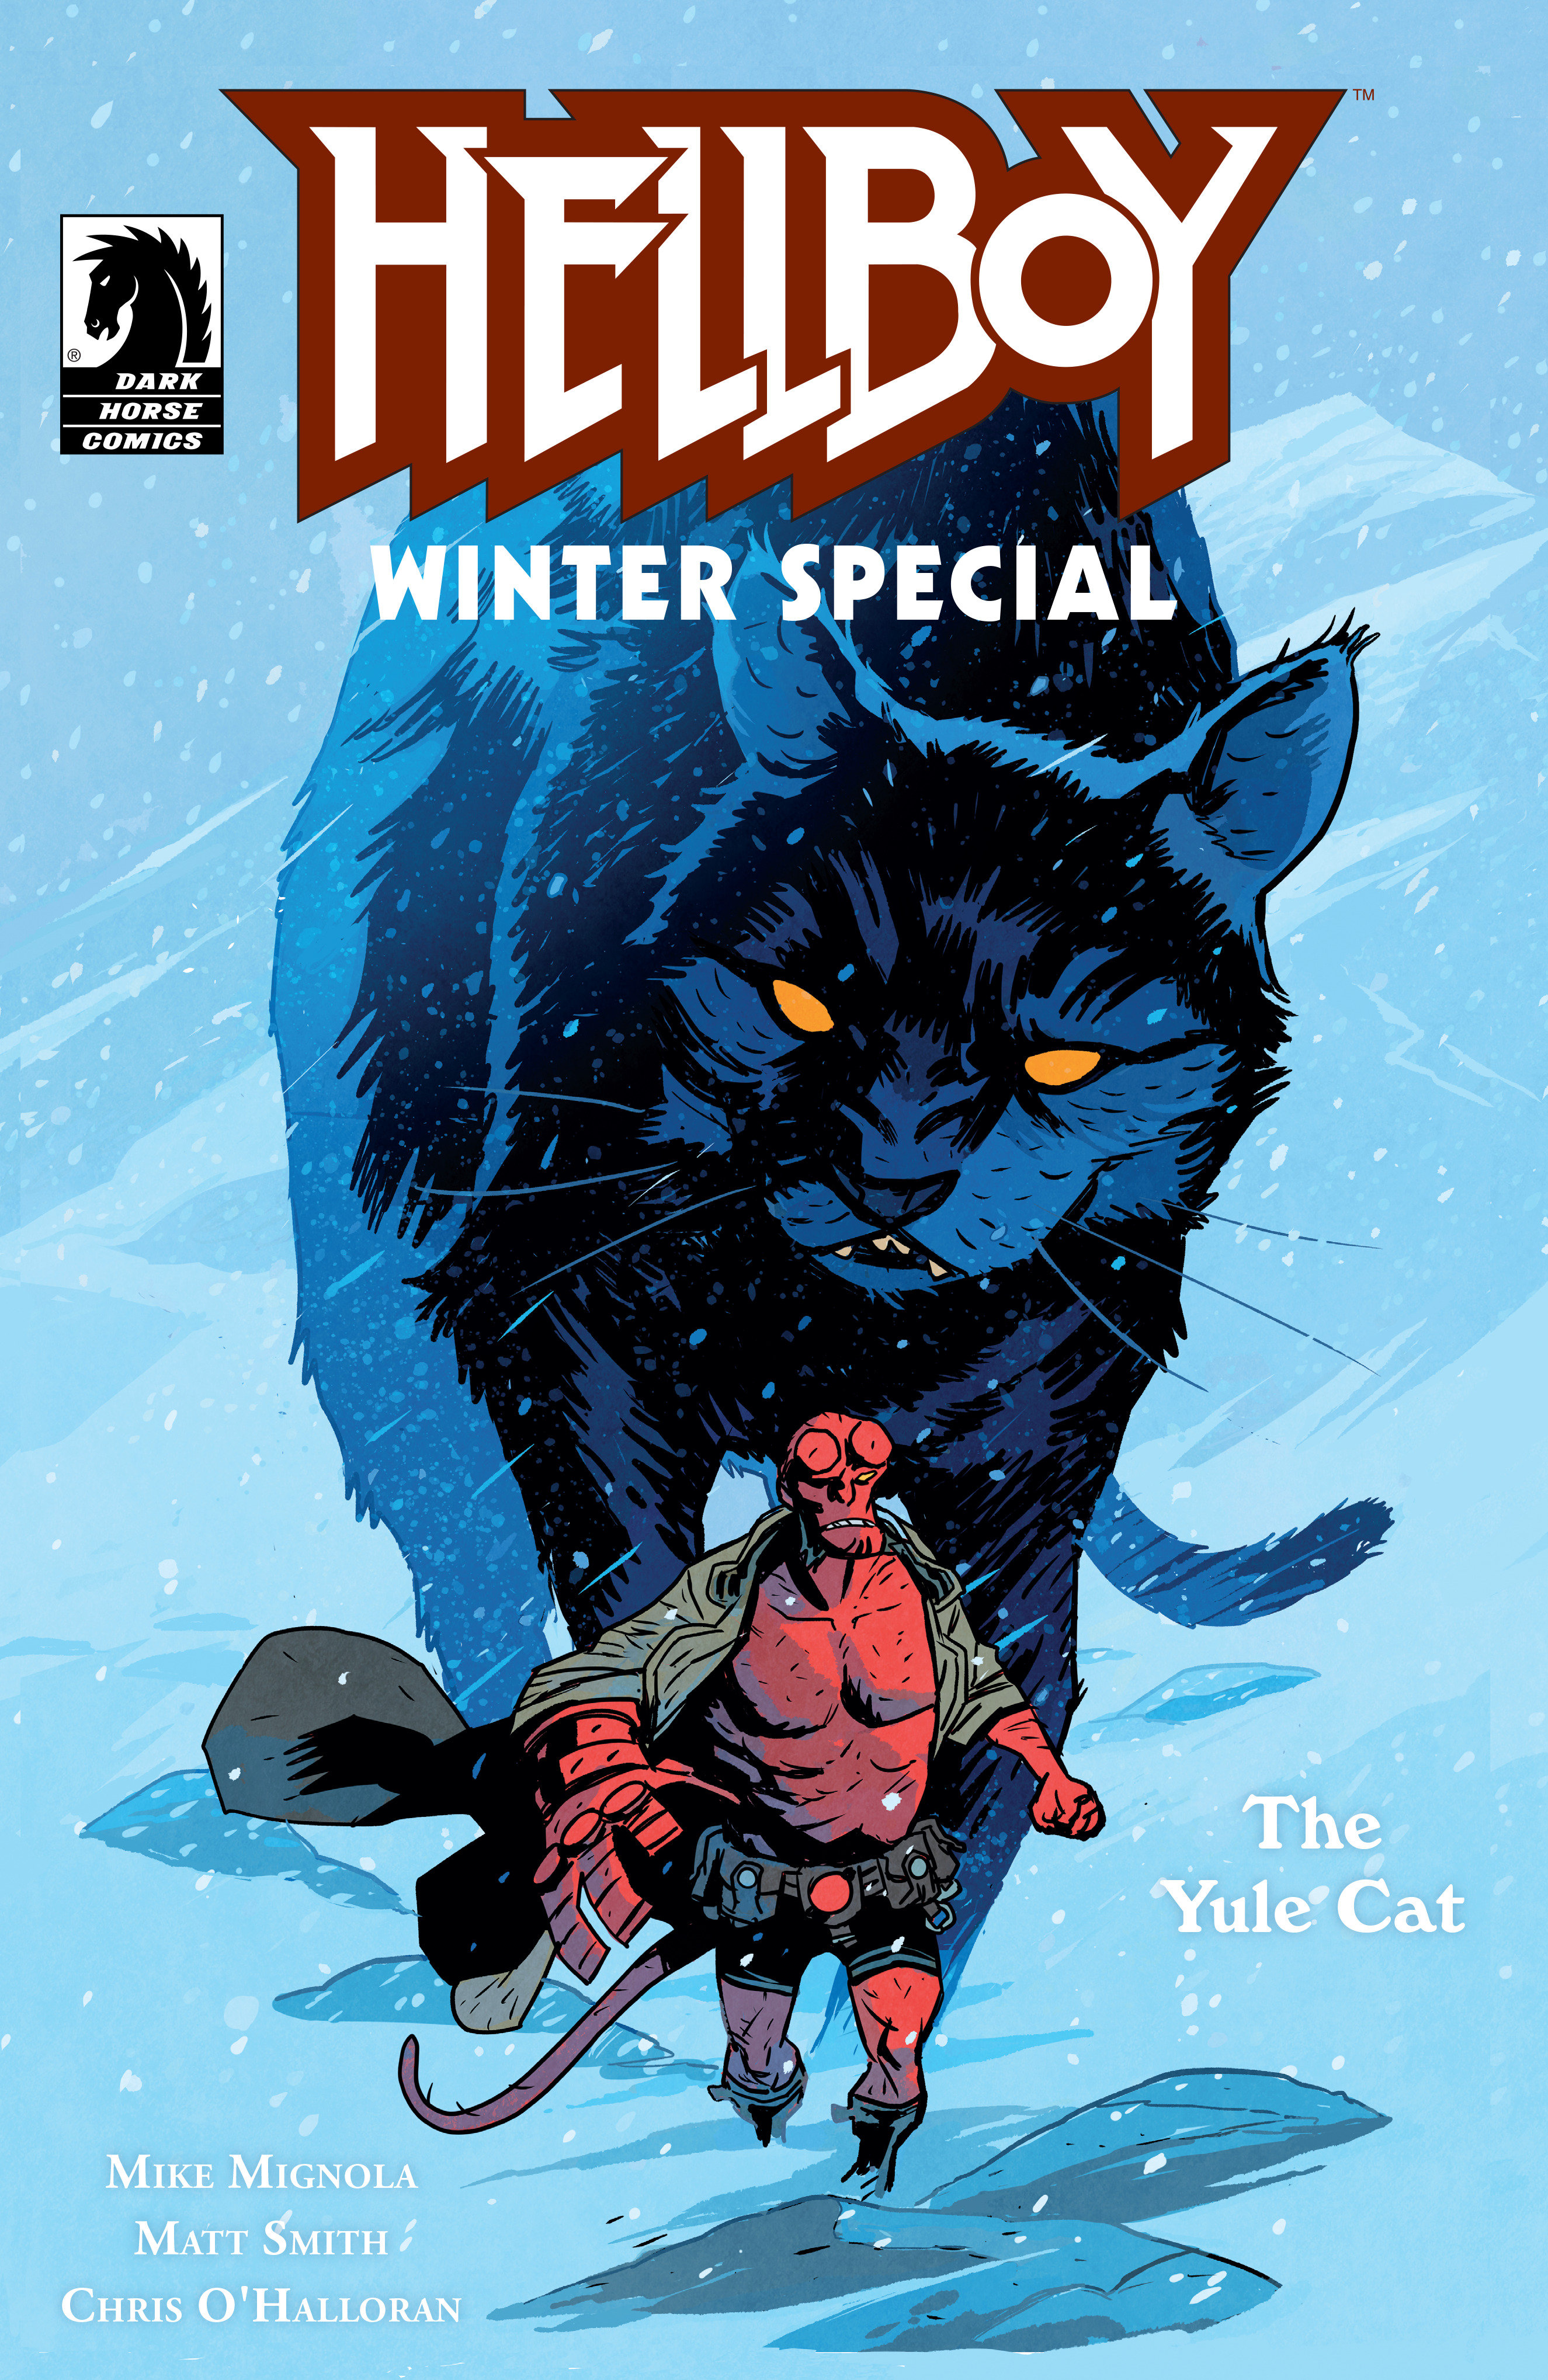 Hellboy & the B.P.R.D. Ongoing #70 Hellboy Winter Special The Yule Cat One-Shot Cover A (Matt Smith)